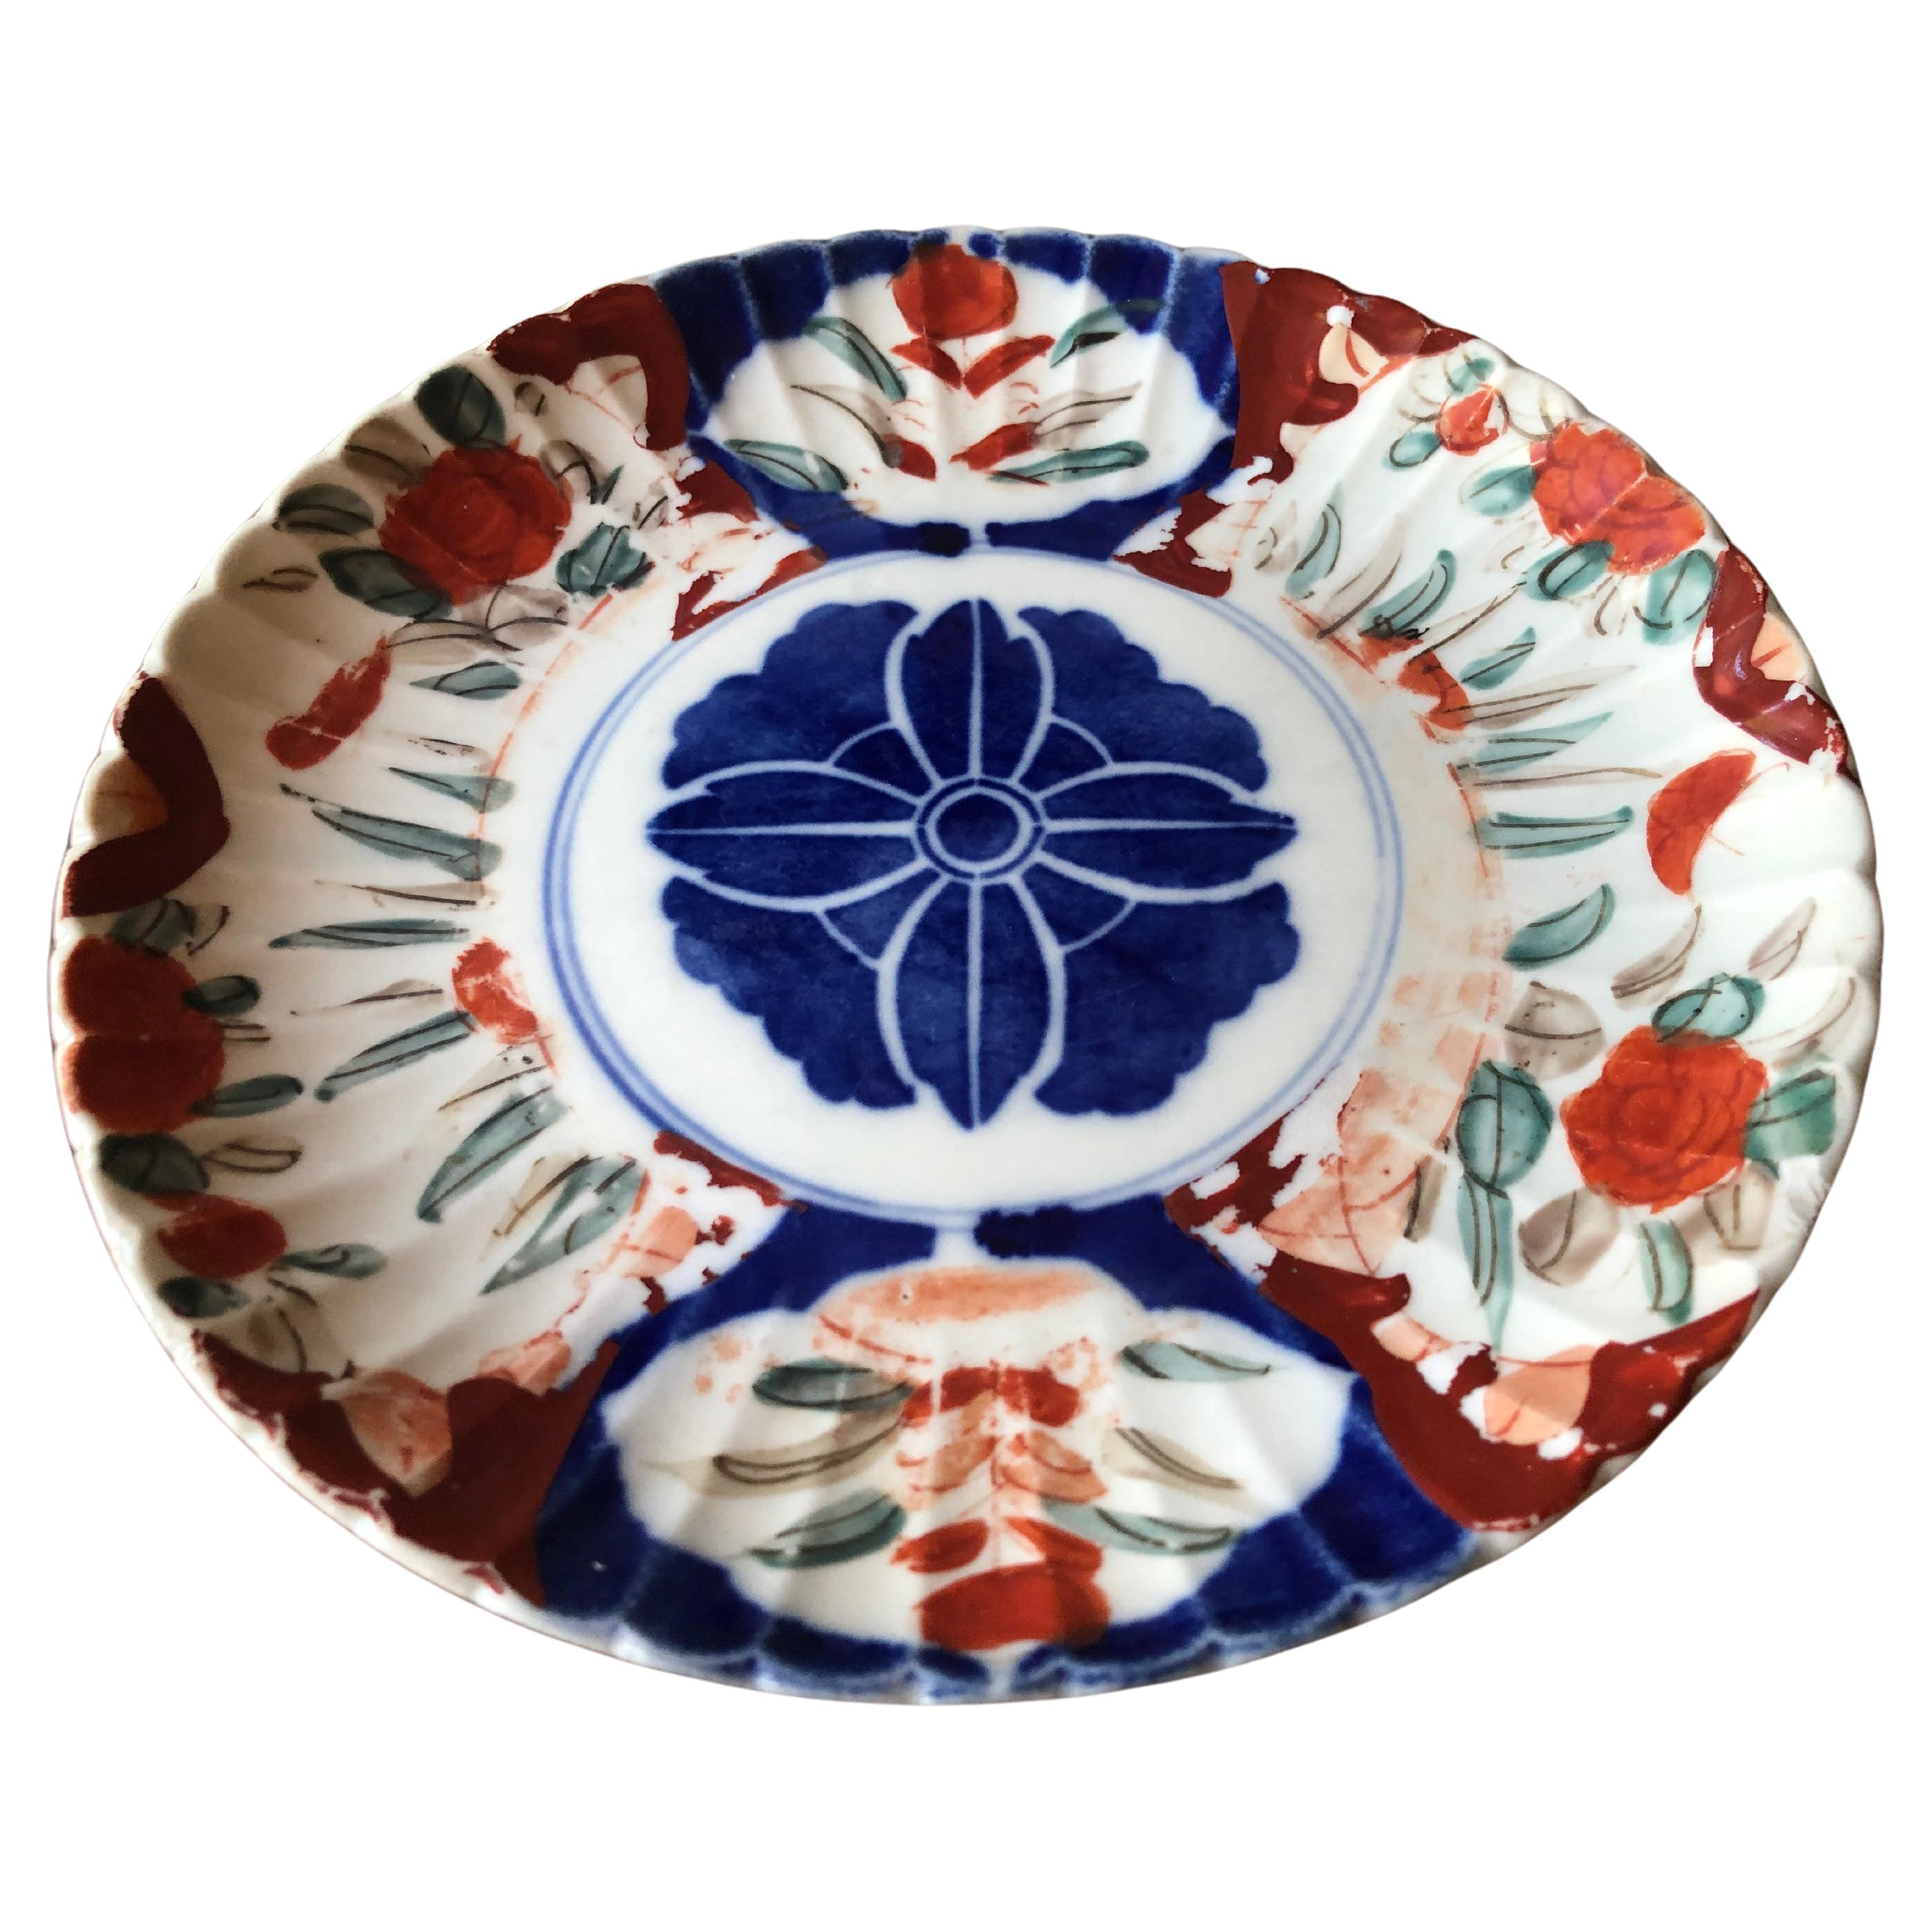 Wonderful 18th to 19th century antique Imari plate with scalloped rim.
Hand painted with central blue medallion, surrounded vibrant orange, crimson, blue, and green patterns. Unmarked on bottom.